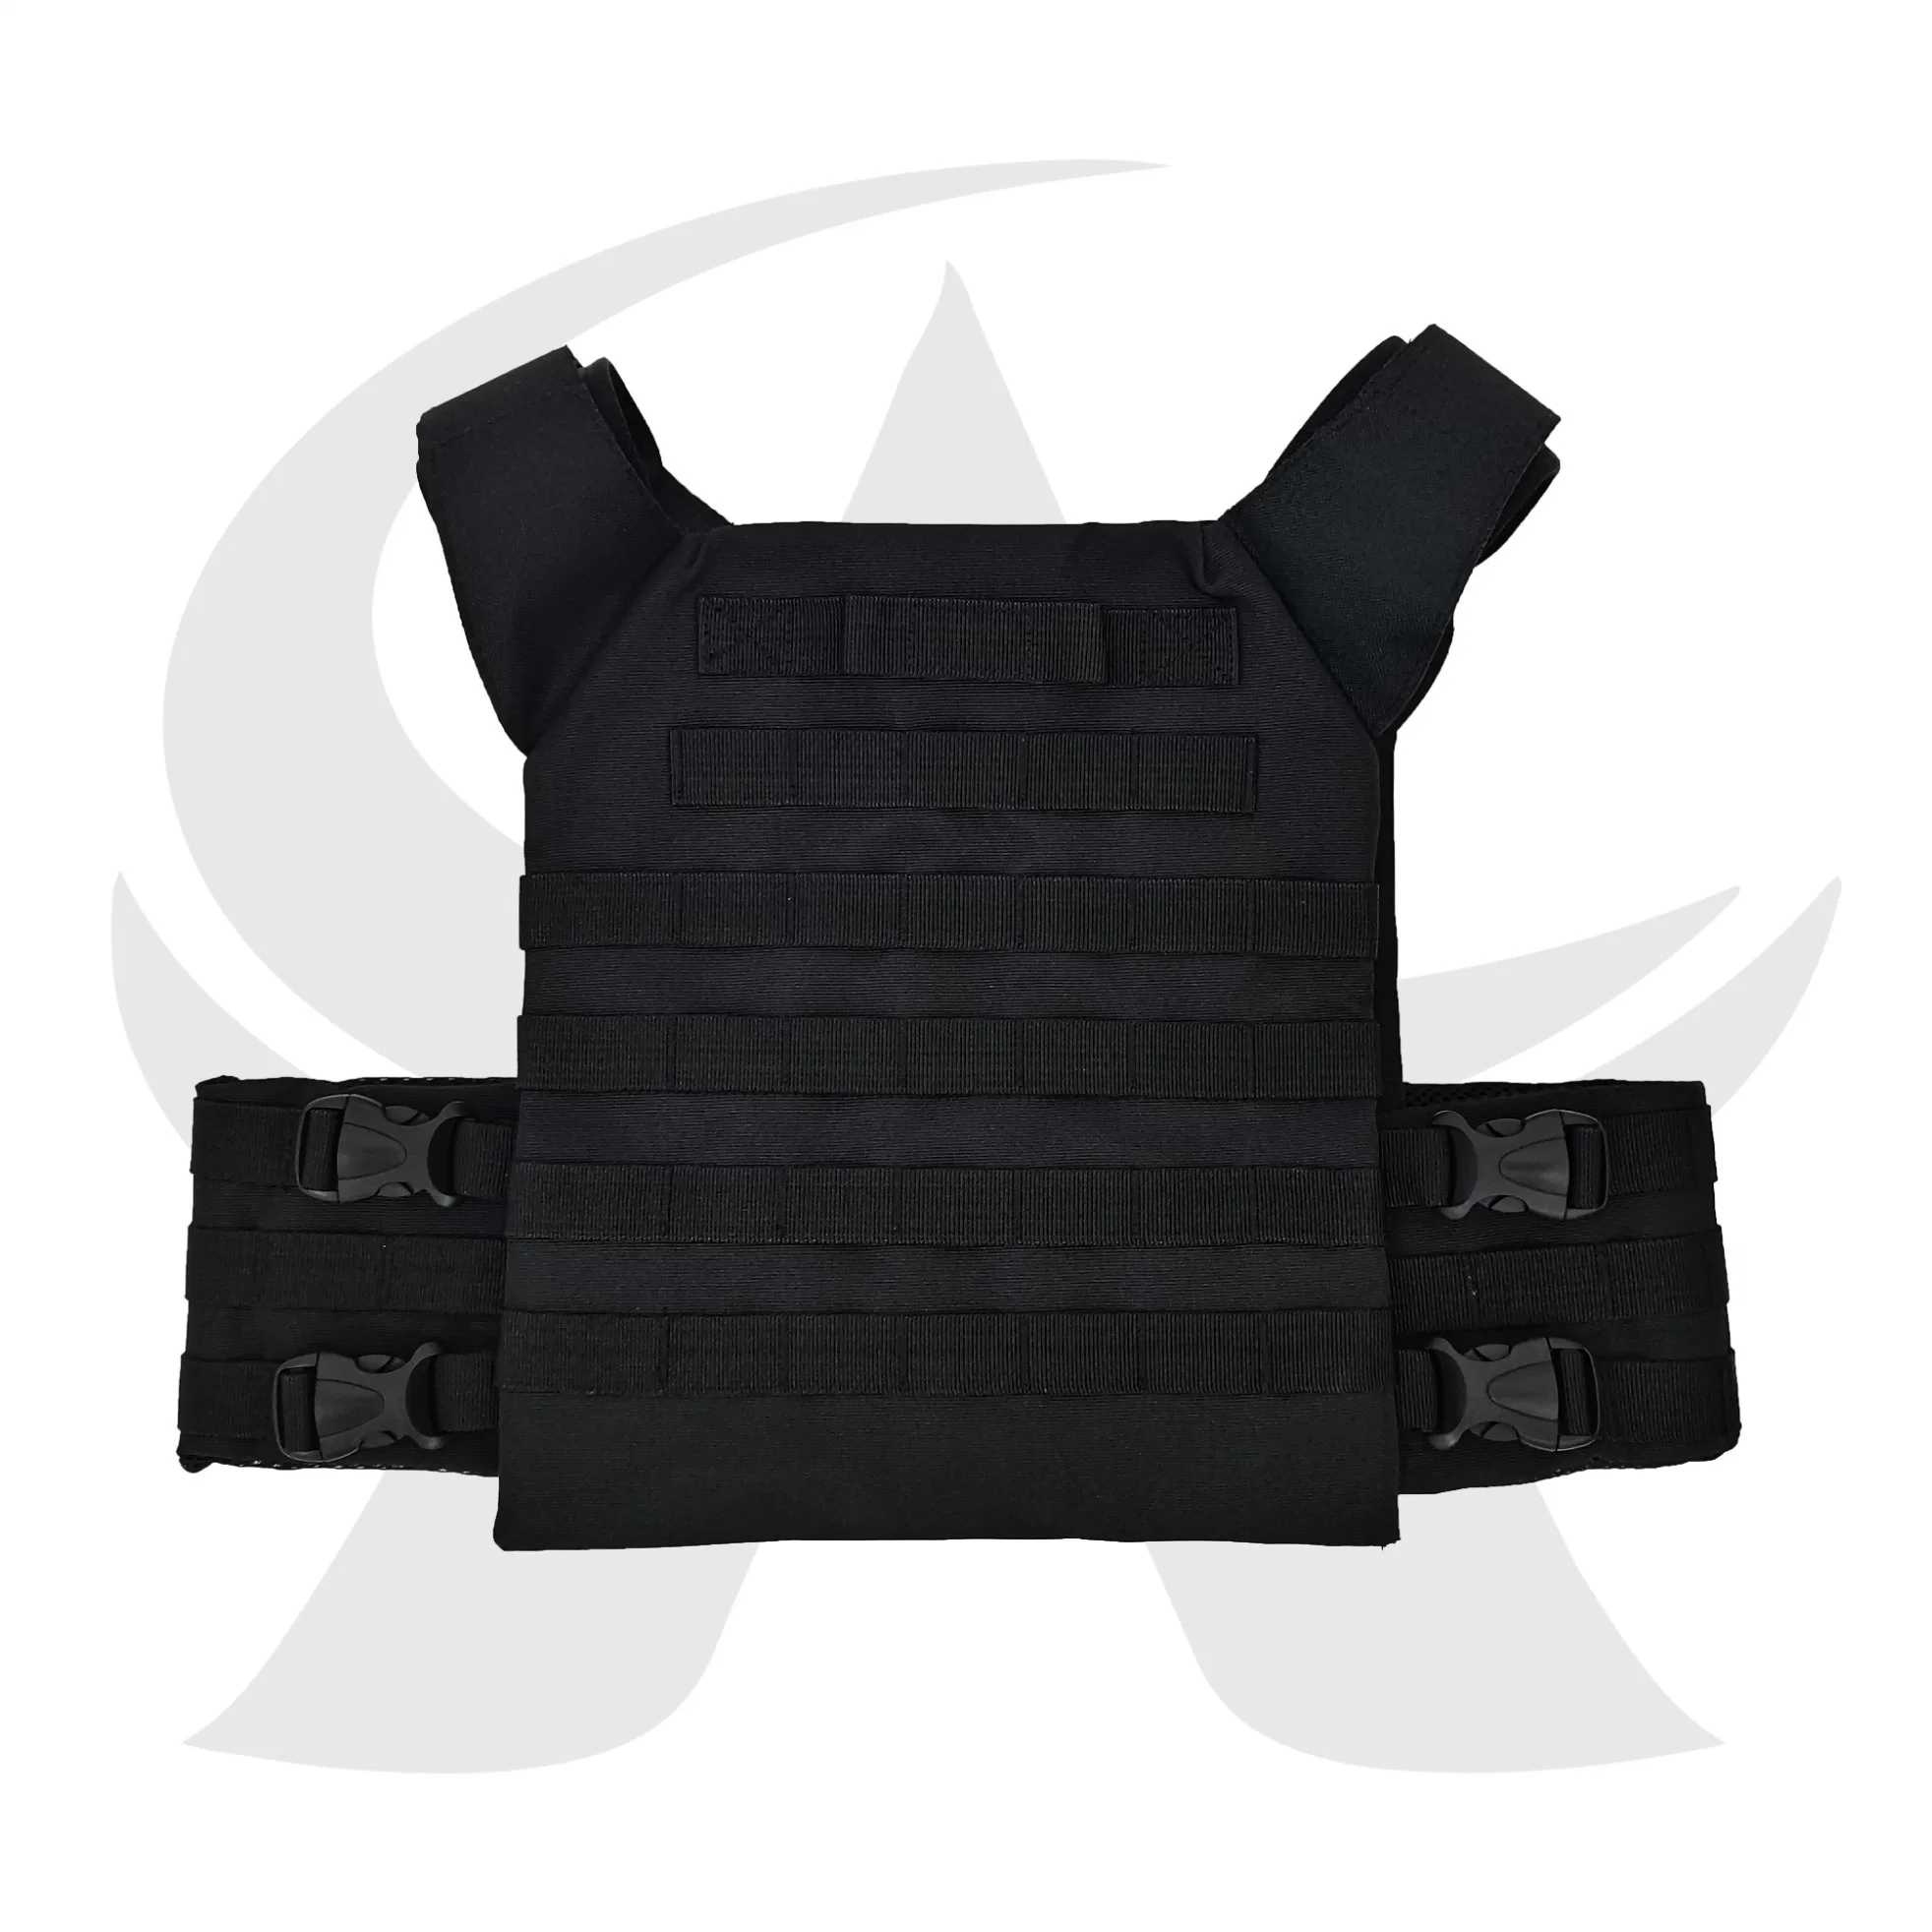 Tactical Vest Light Weight Vest Outdoor Army Camouflage Multi-Function Moll Field CS Combat Vest